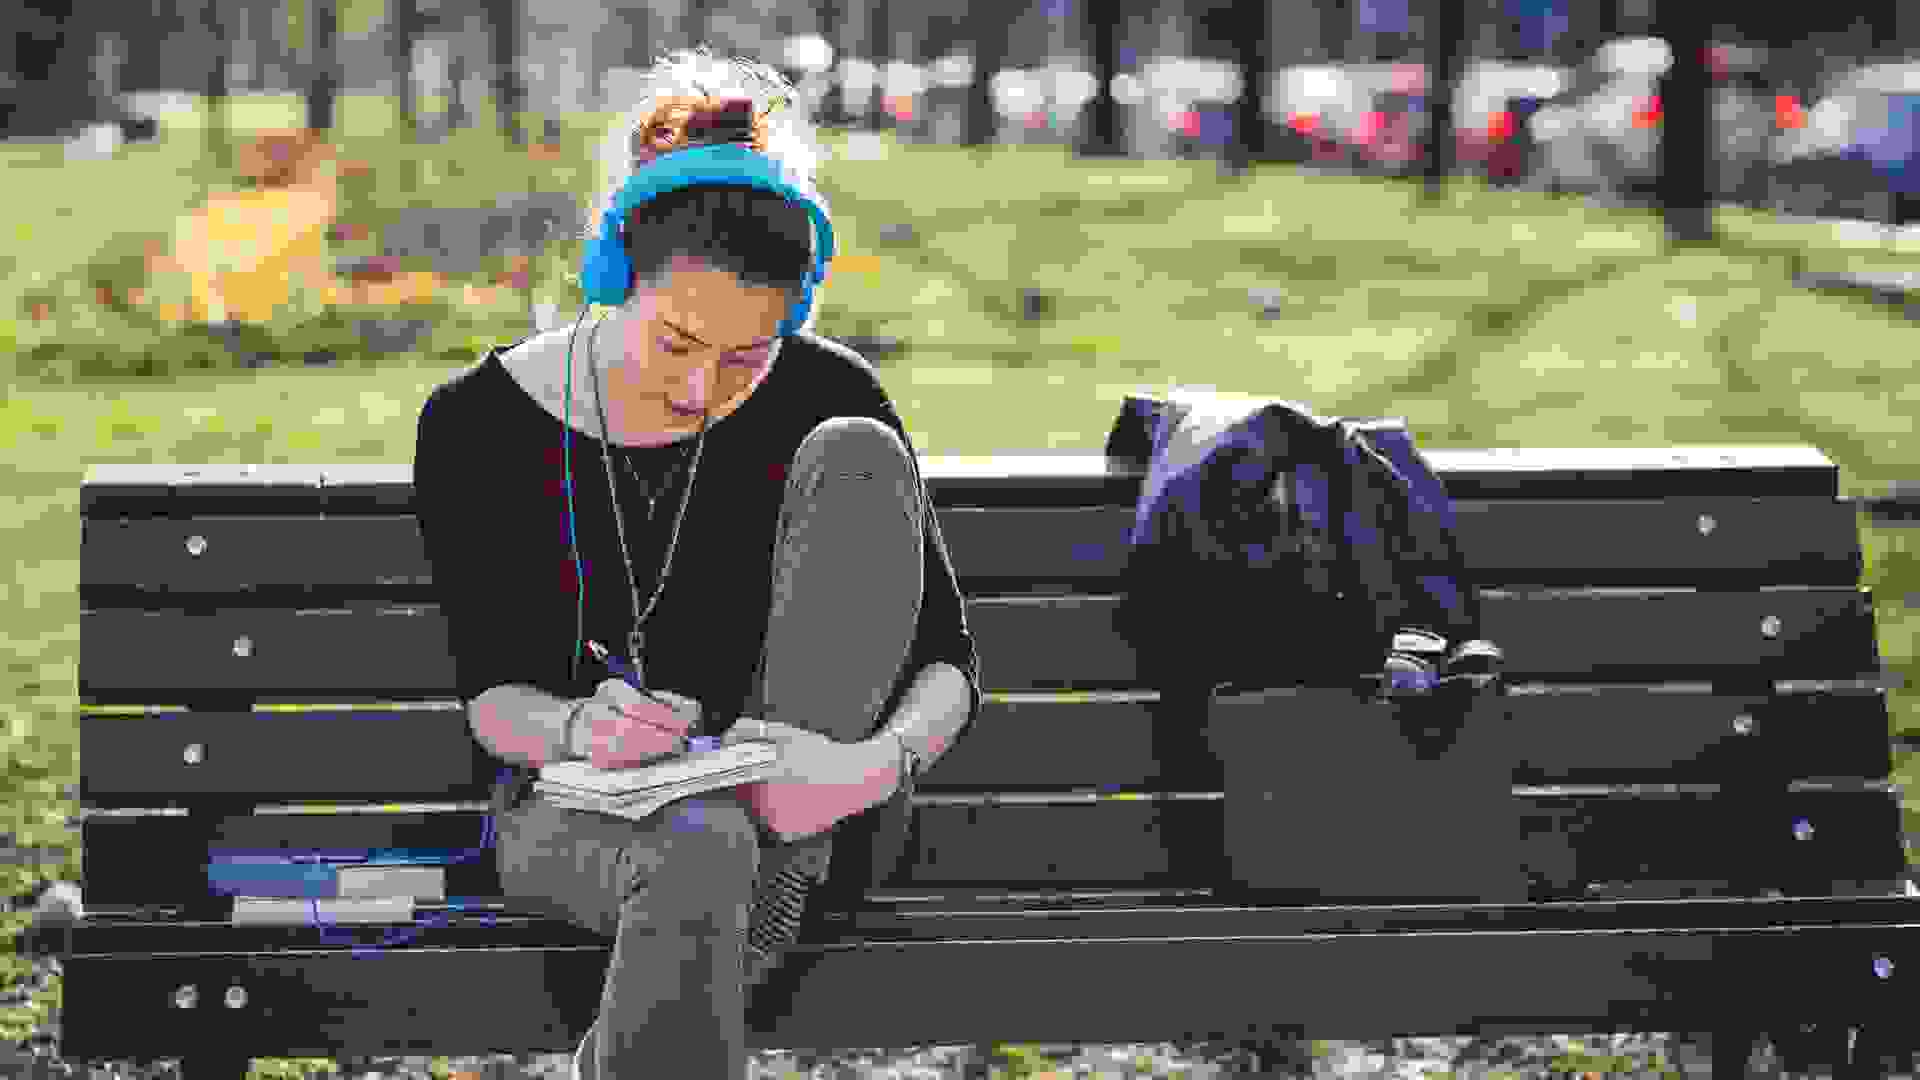 Student girl reading on a bench in the park and listening to music.